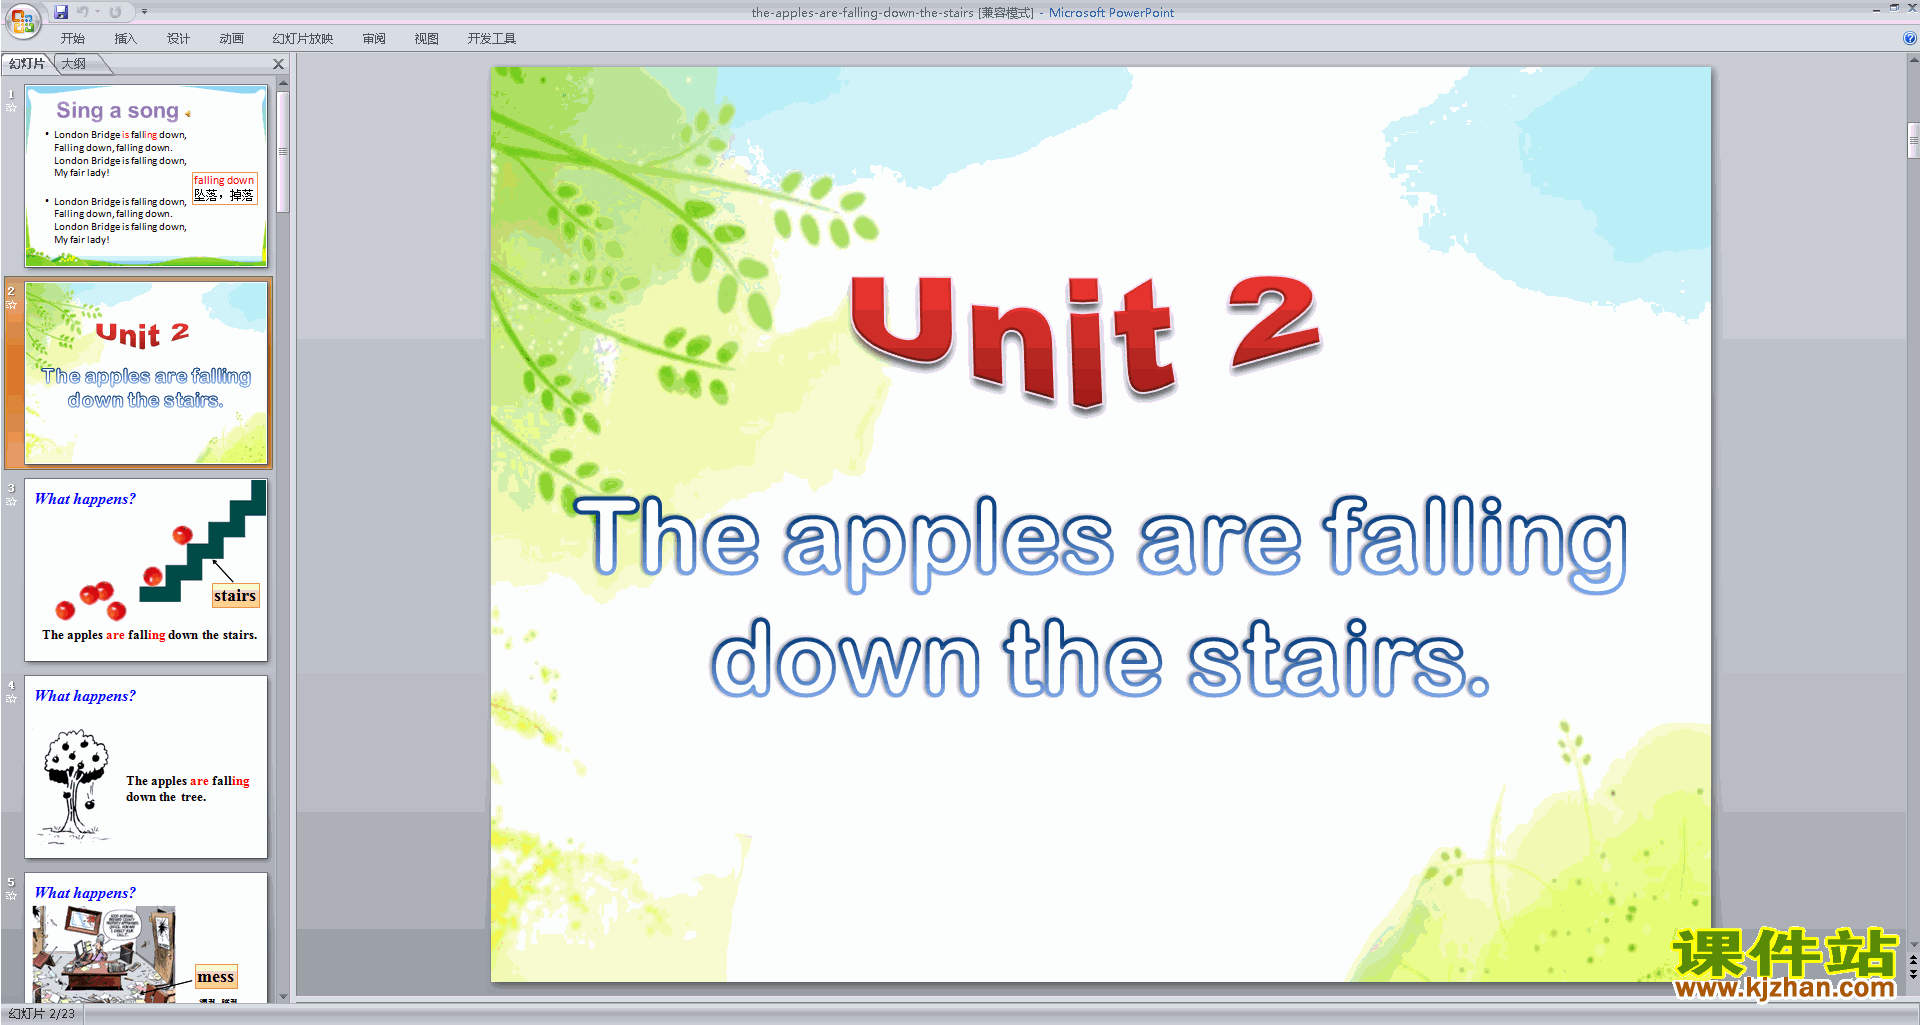 ʿThe apples are falling down the stairspptμ